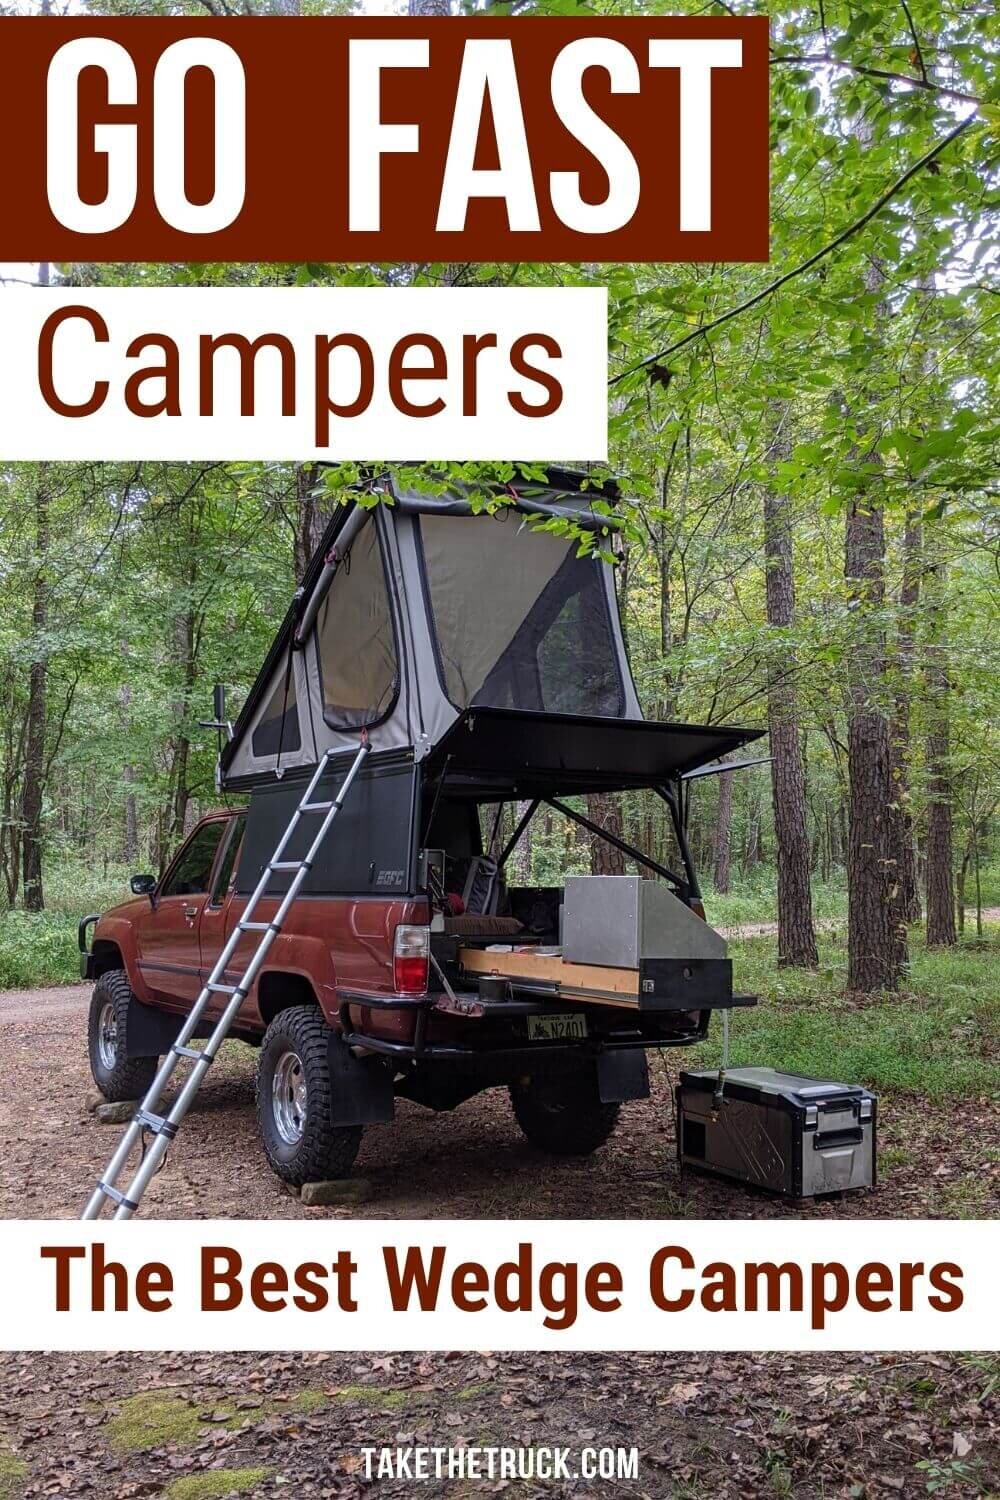 We upped our truck bed camping game and got a wedge truck camper! Check out this post for 5 reasons we landed on Go Fast Campers when deciding to upgrade to a wedge camper for our Toyota.